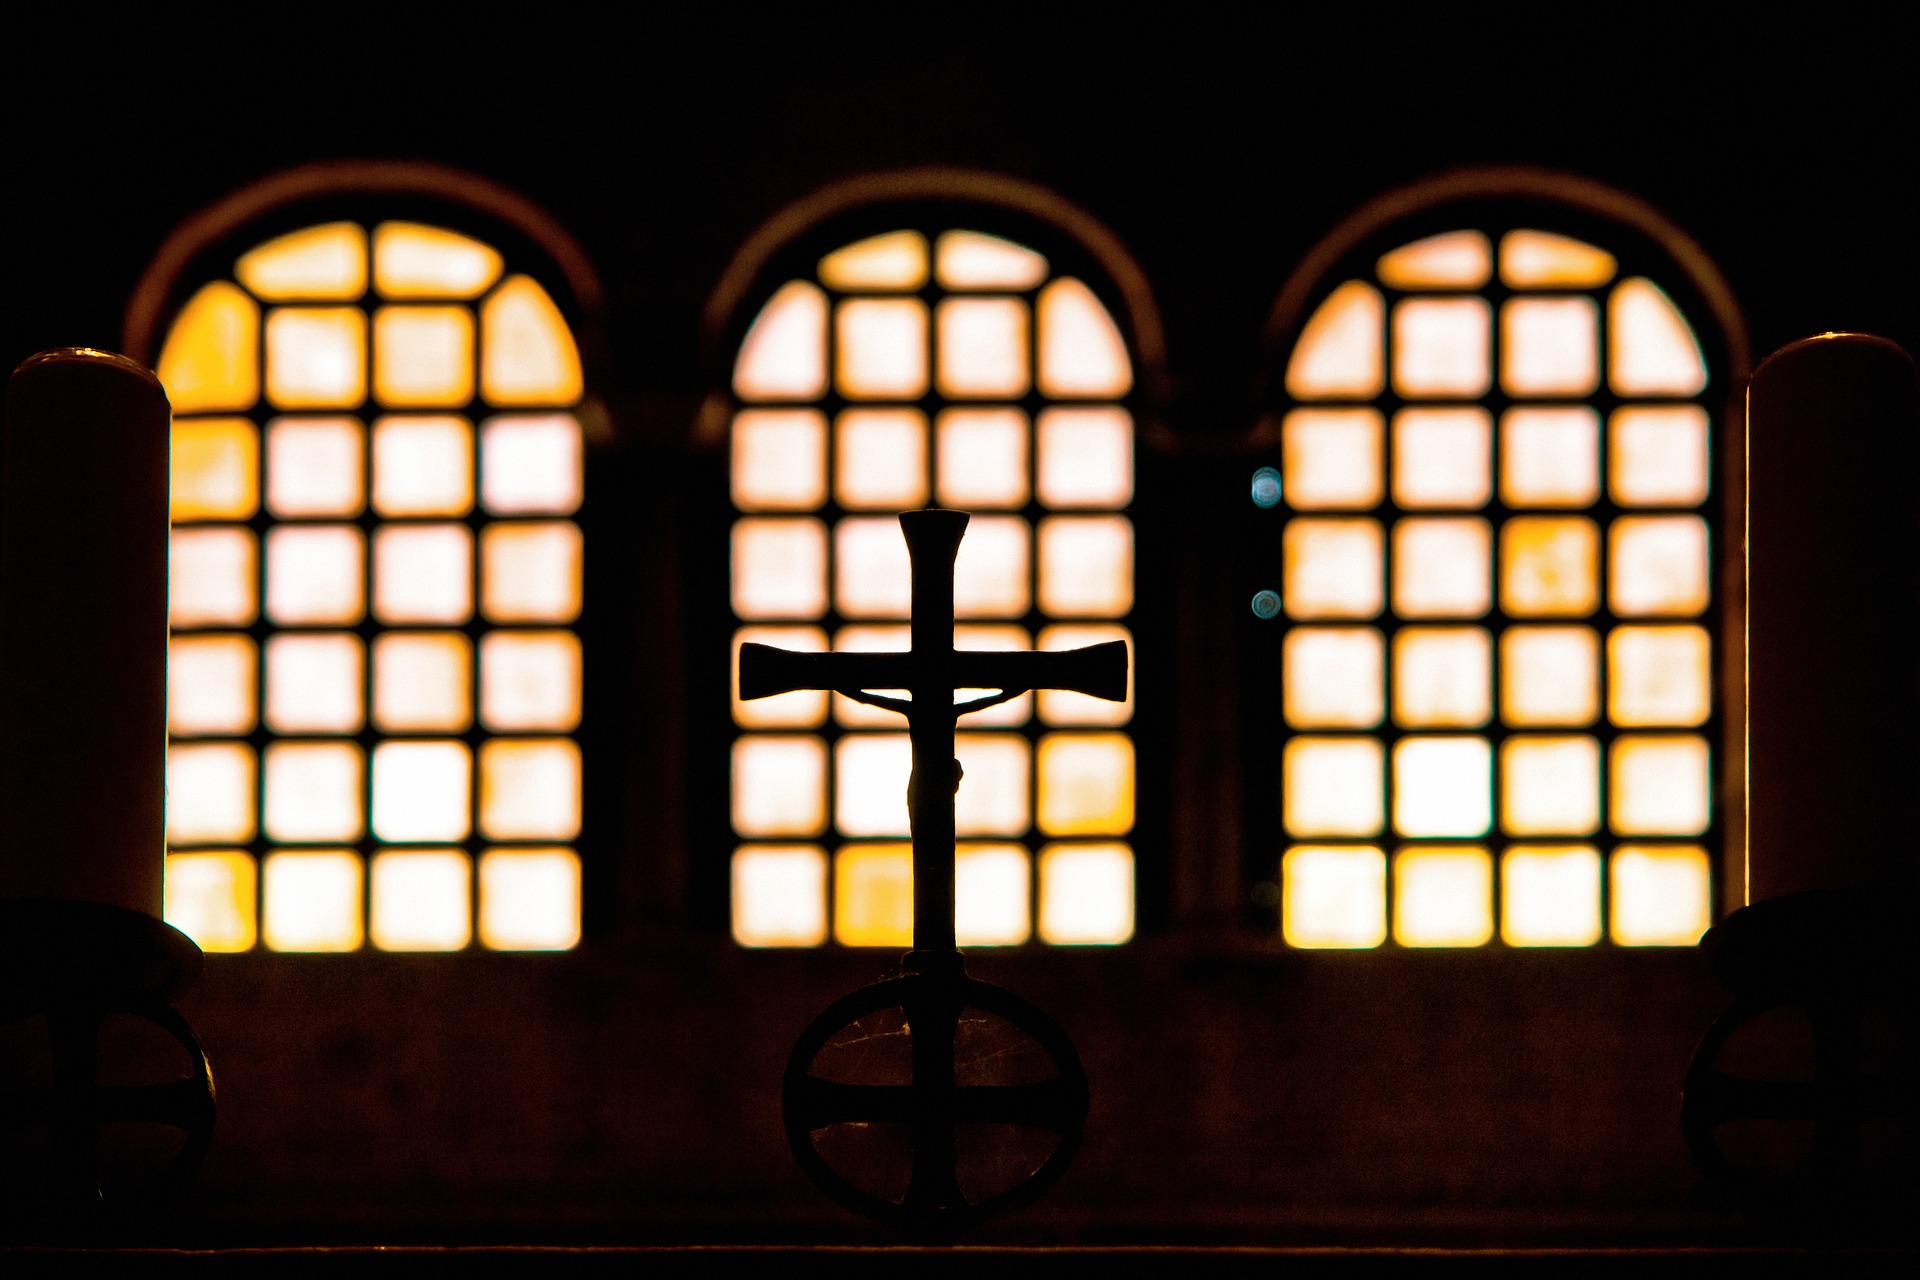 A silhouette shot of the Cross in front of antique wooden windows